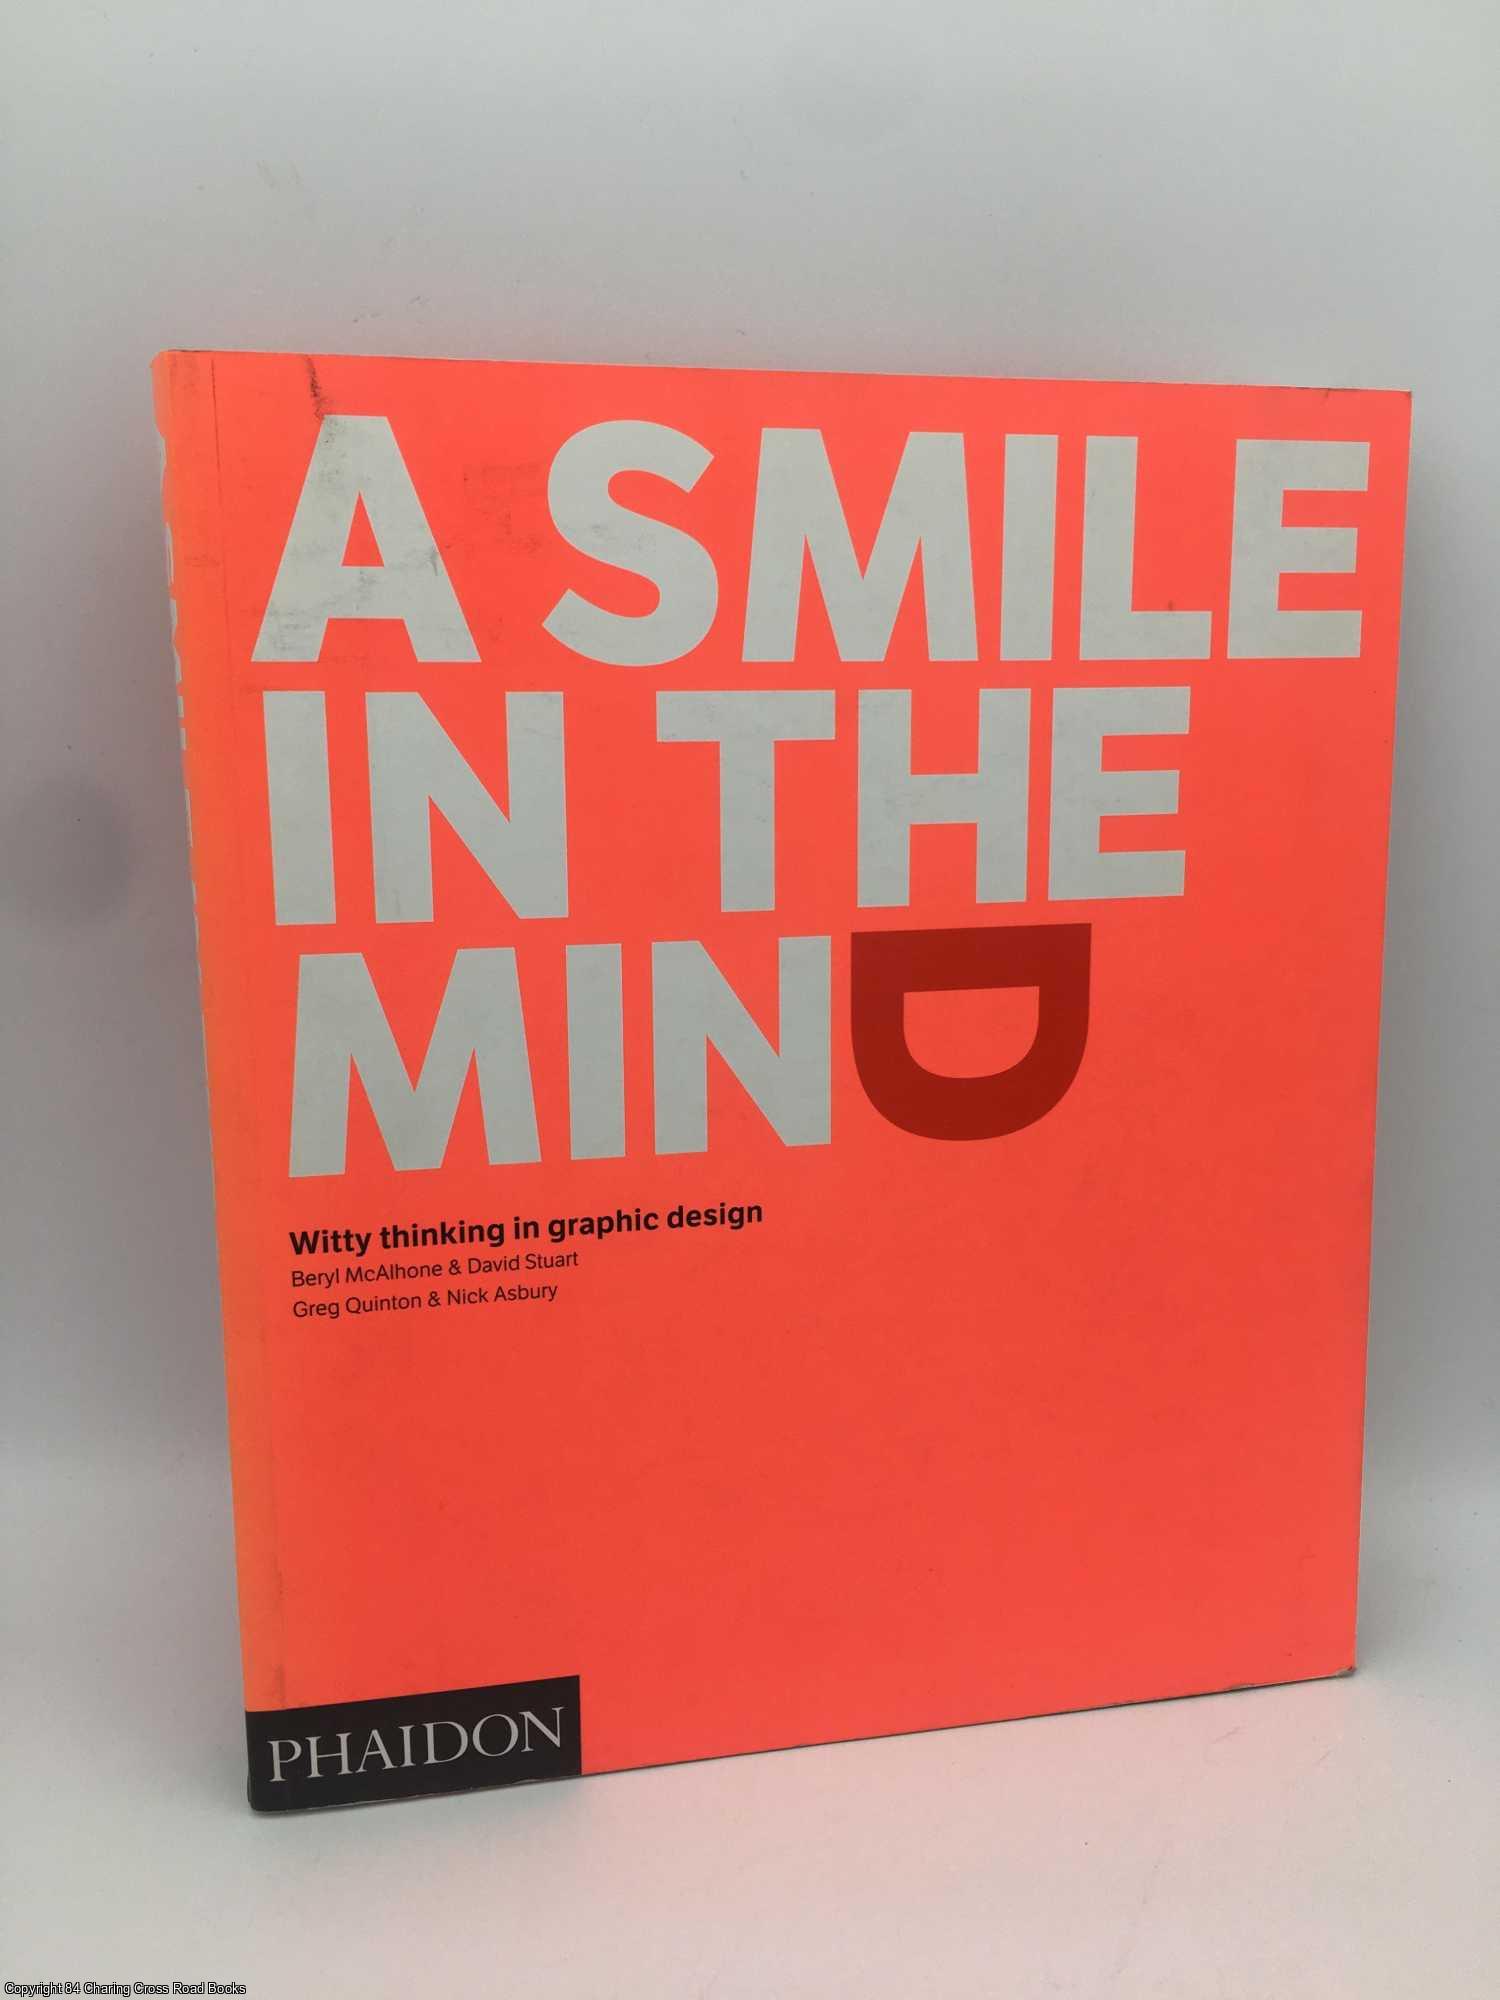 McAlhone, Beryl - A Smile in the Mind: Witty Thinking in Graphic Design